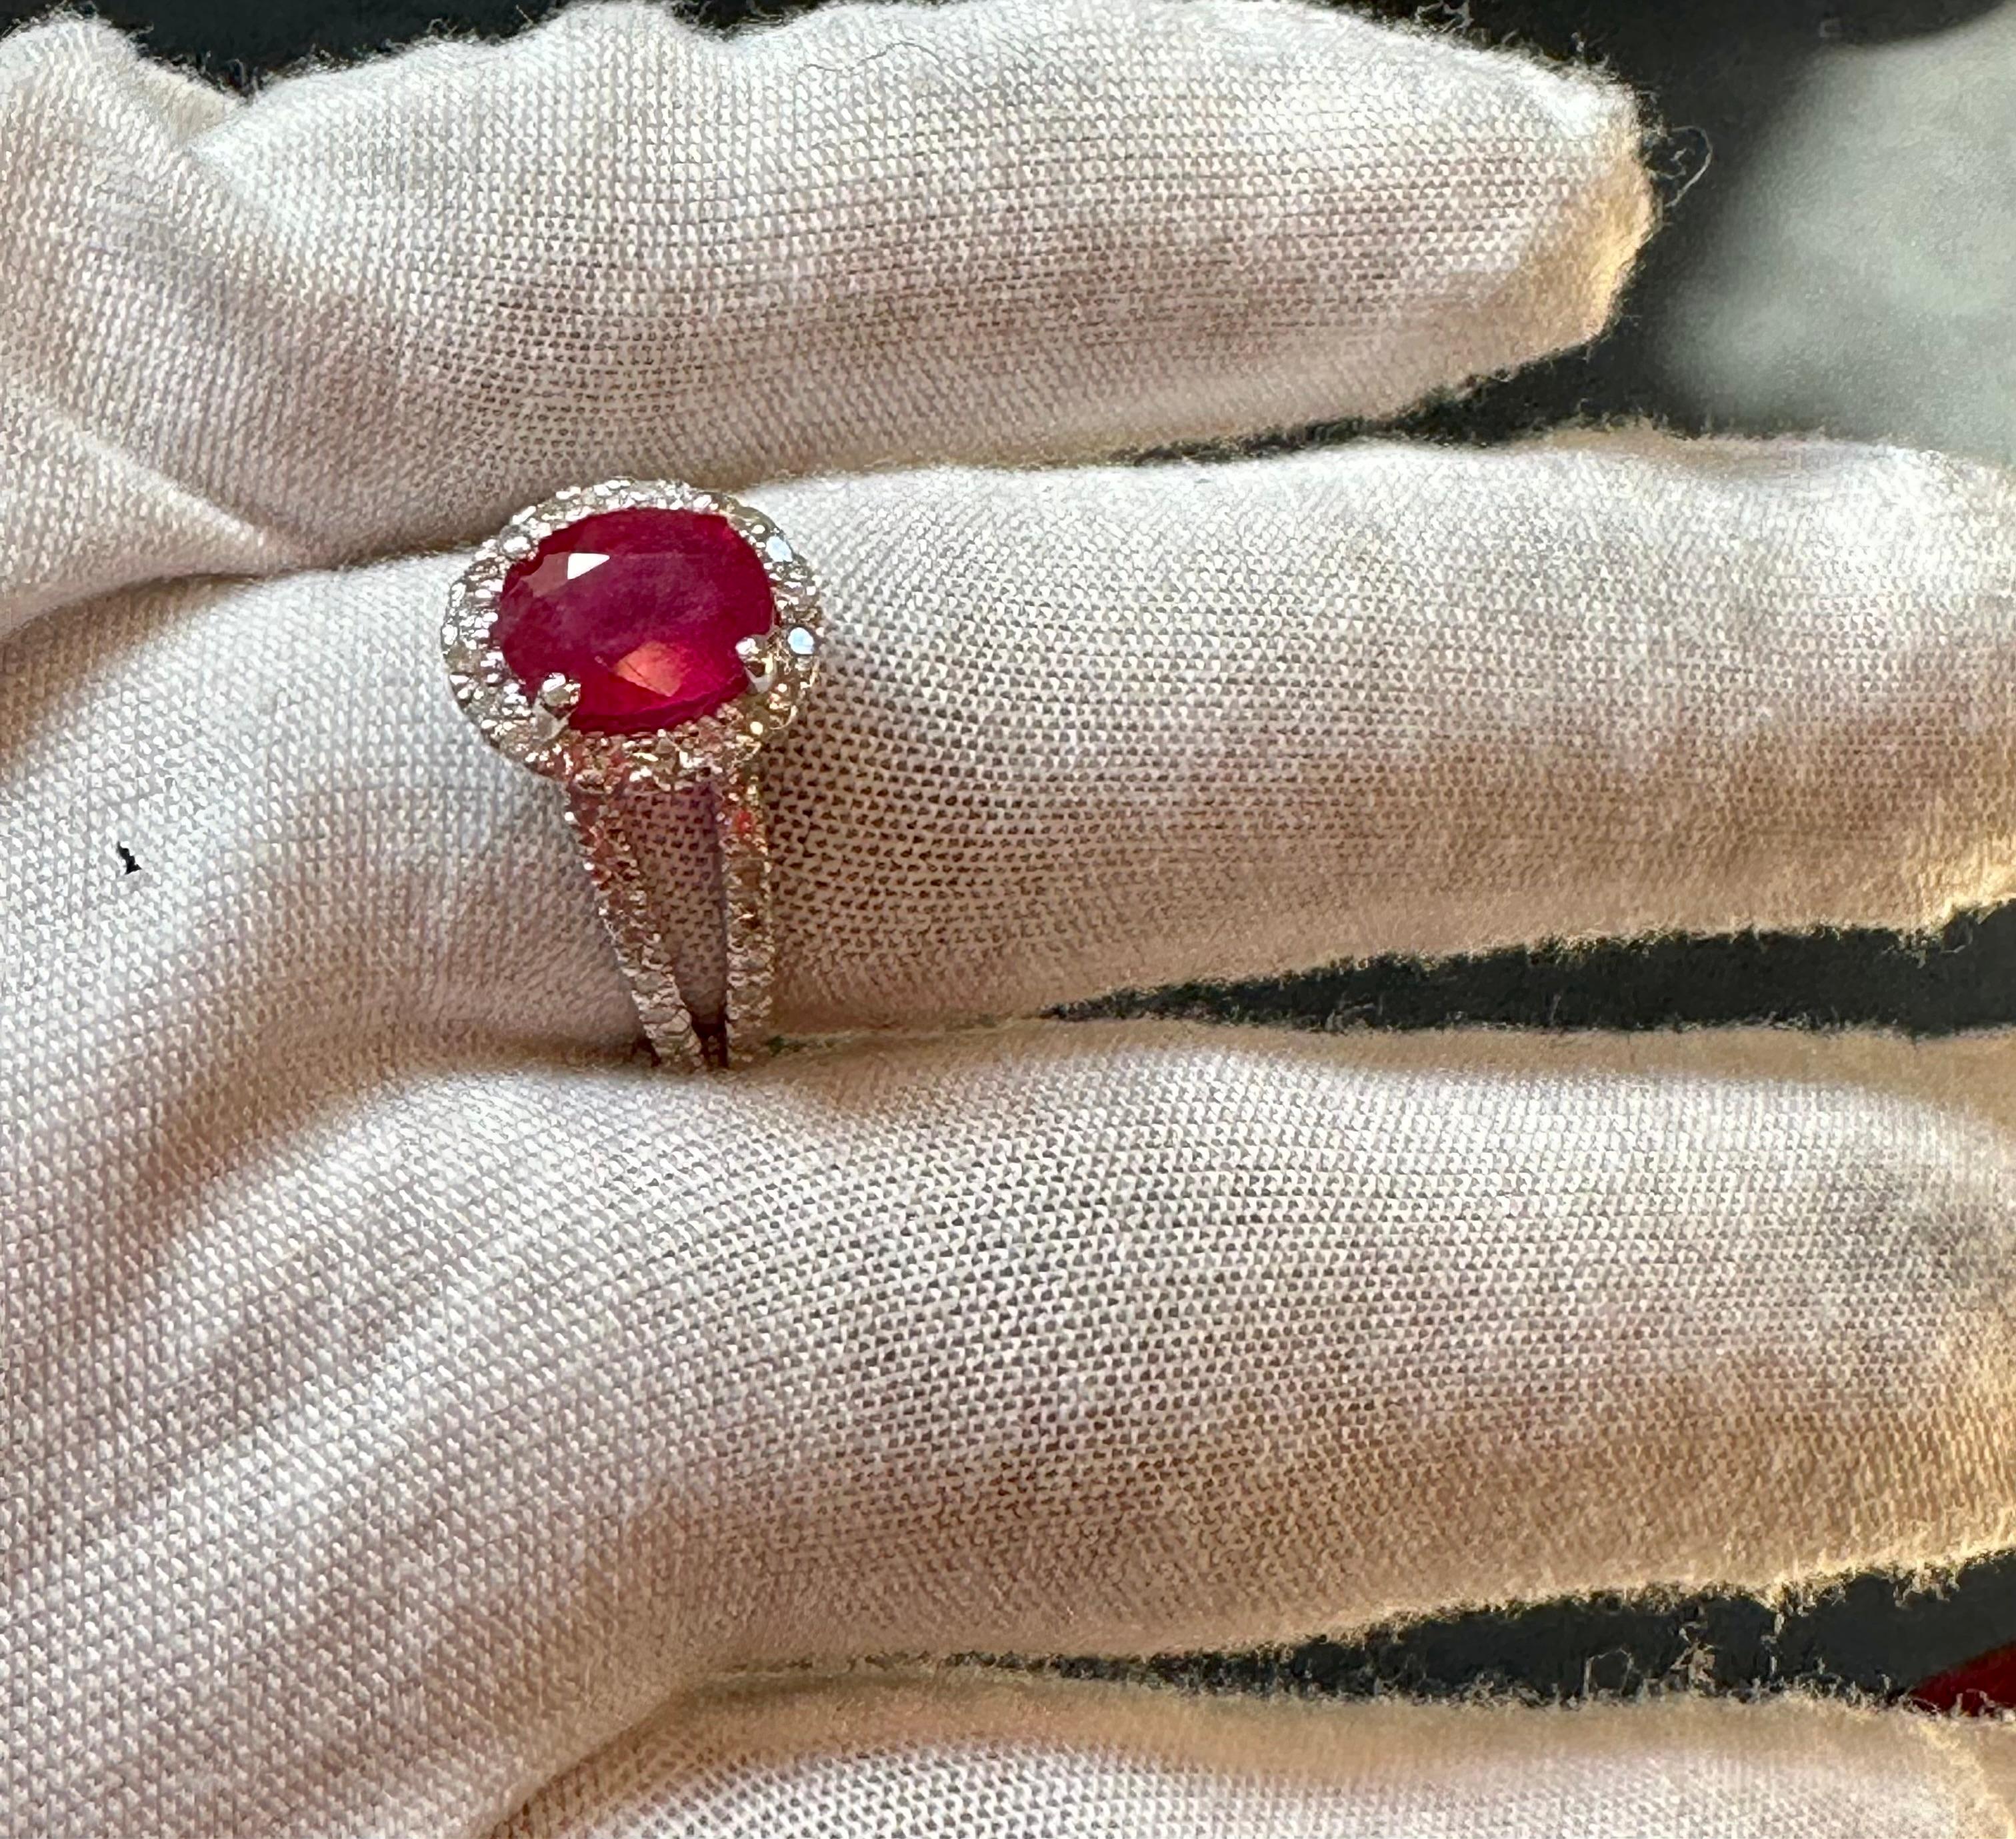 Oval Cut 2.5 Carat Oval Treated Ruby & 2 ct Diamond Ring 14 Karat White Gold Size 7.25 For Sale